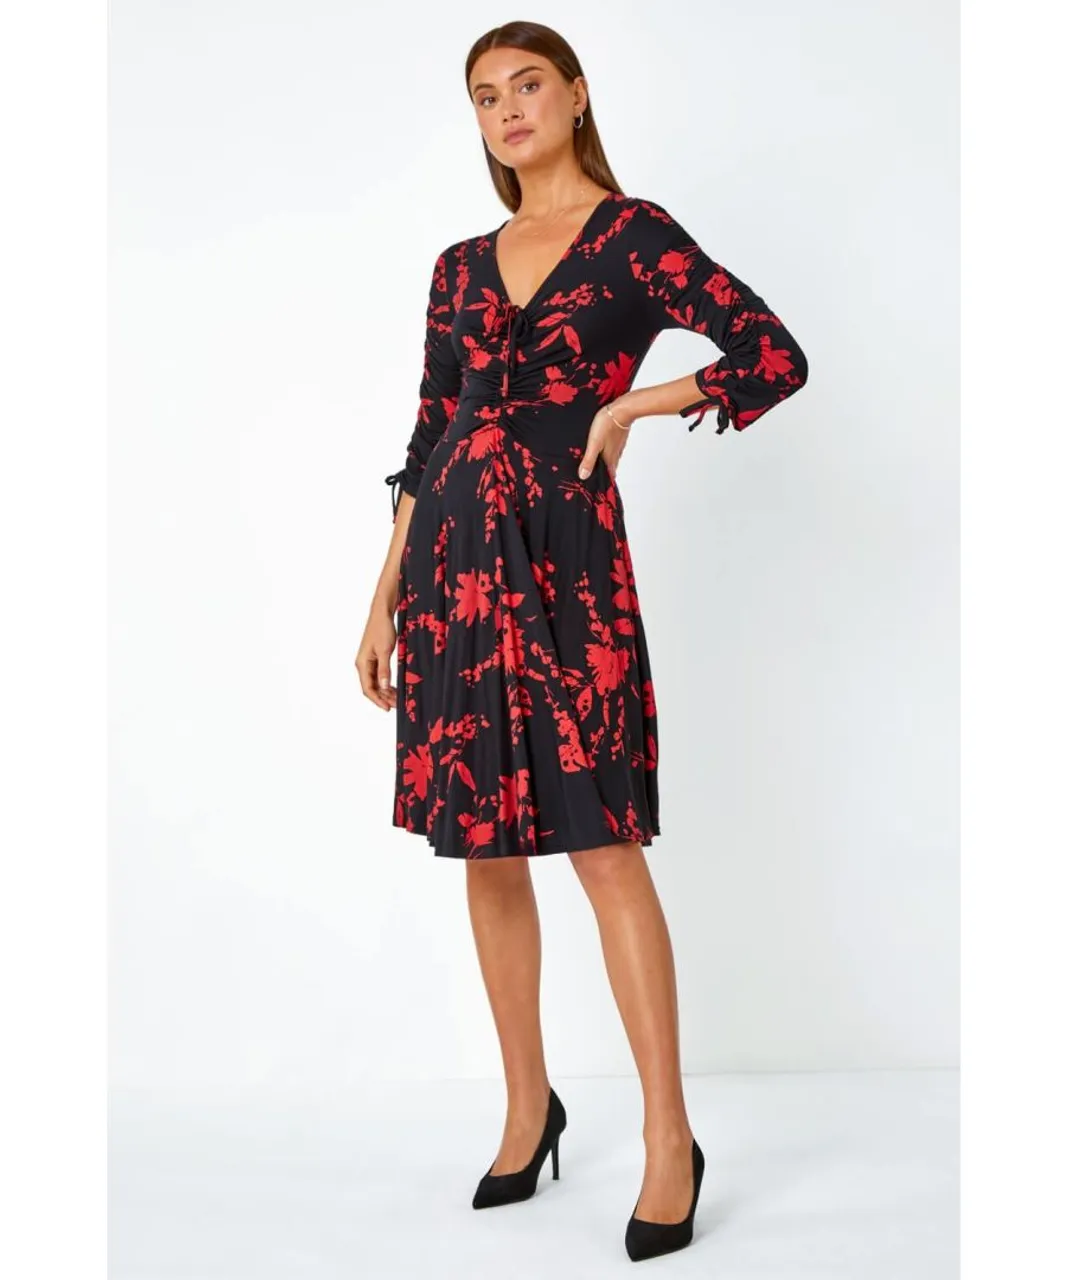 Roman Womens Floral Shadow Print Ruched Stretch Dress - Red Leather